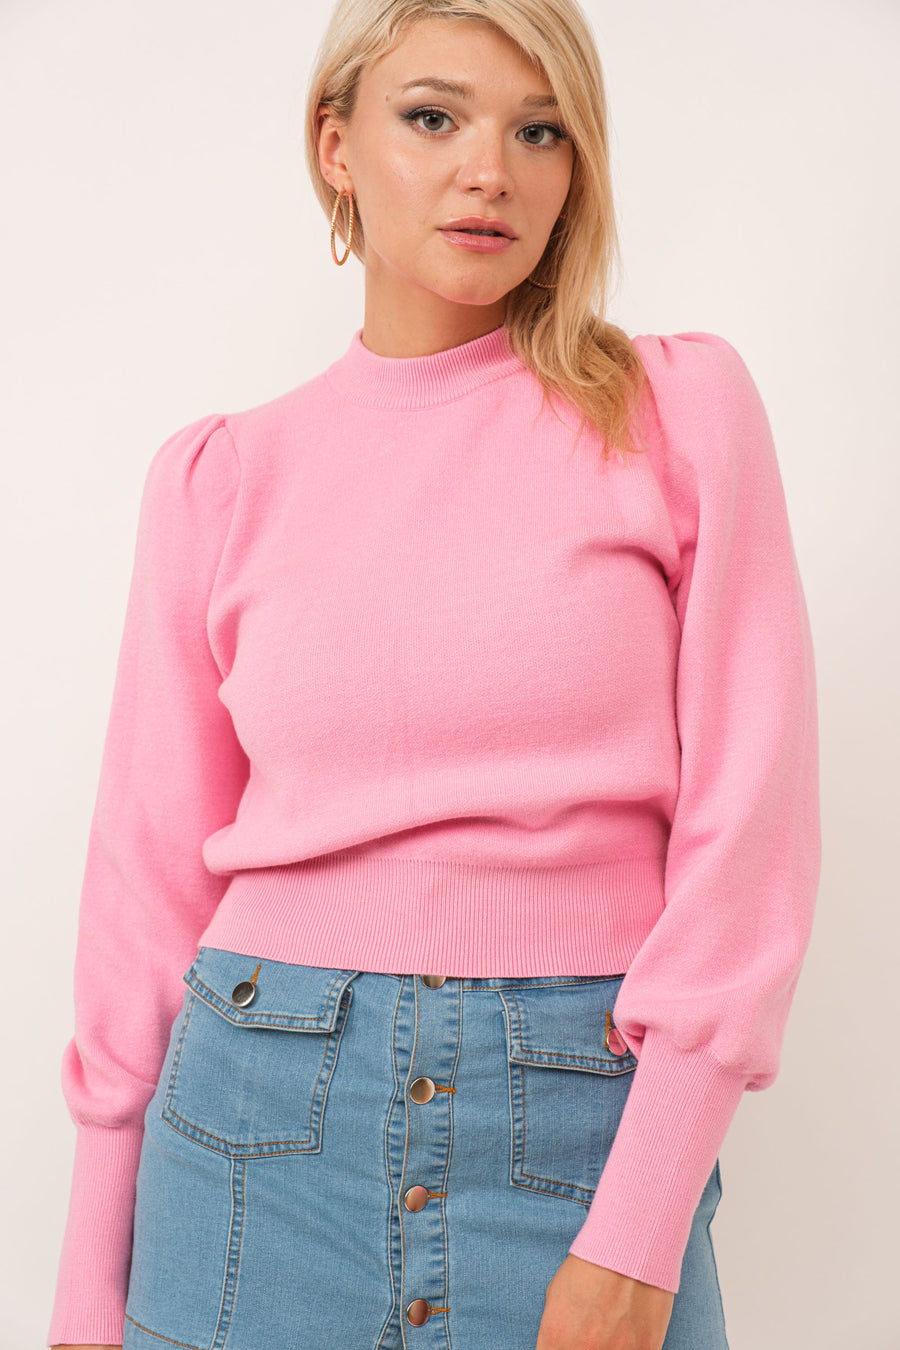 TCS2126-Bishop Sleeve Knit Sweater Top